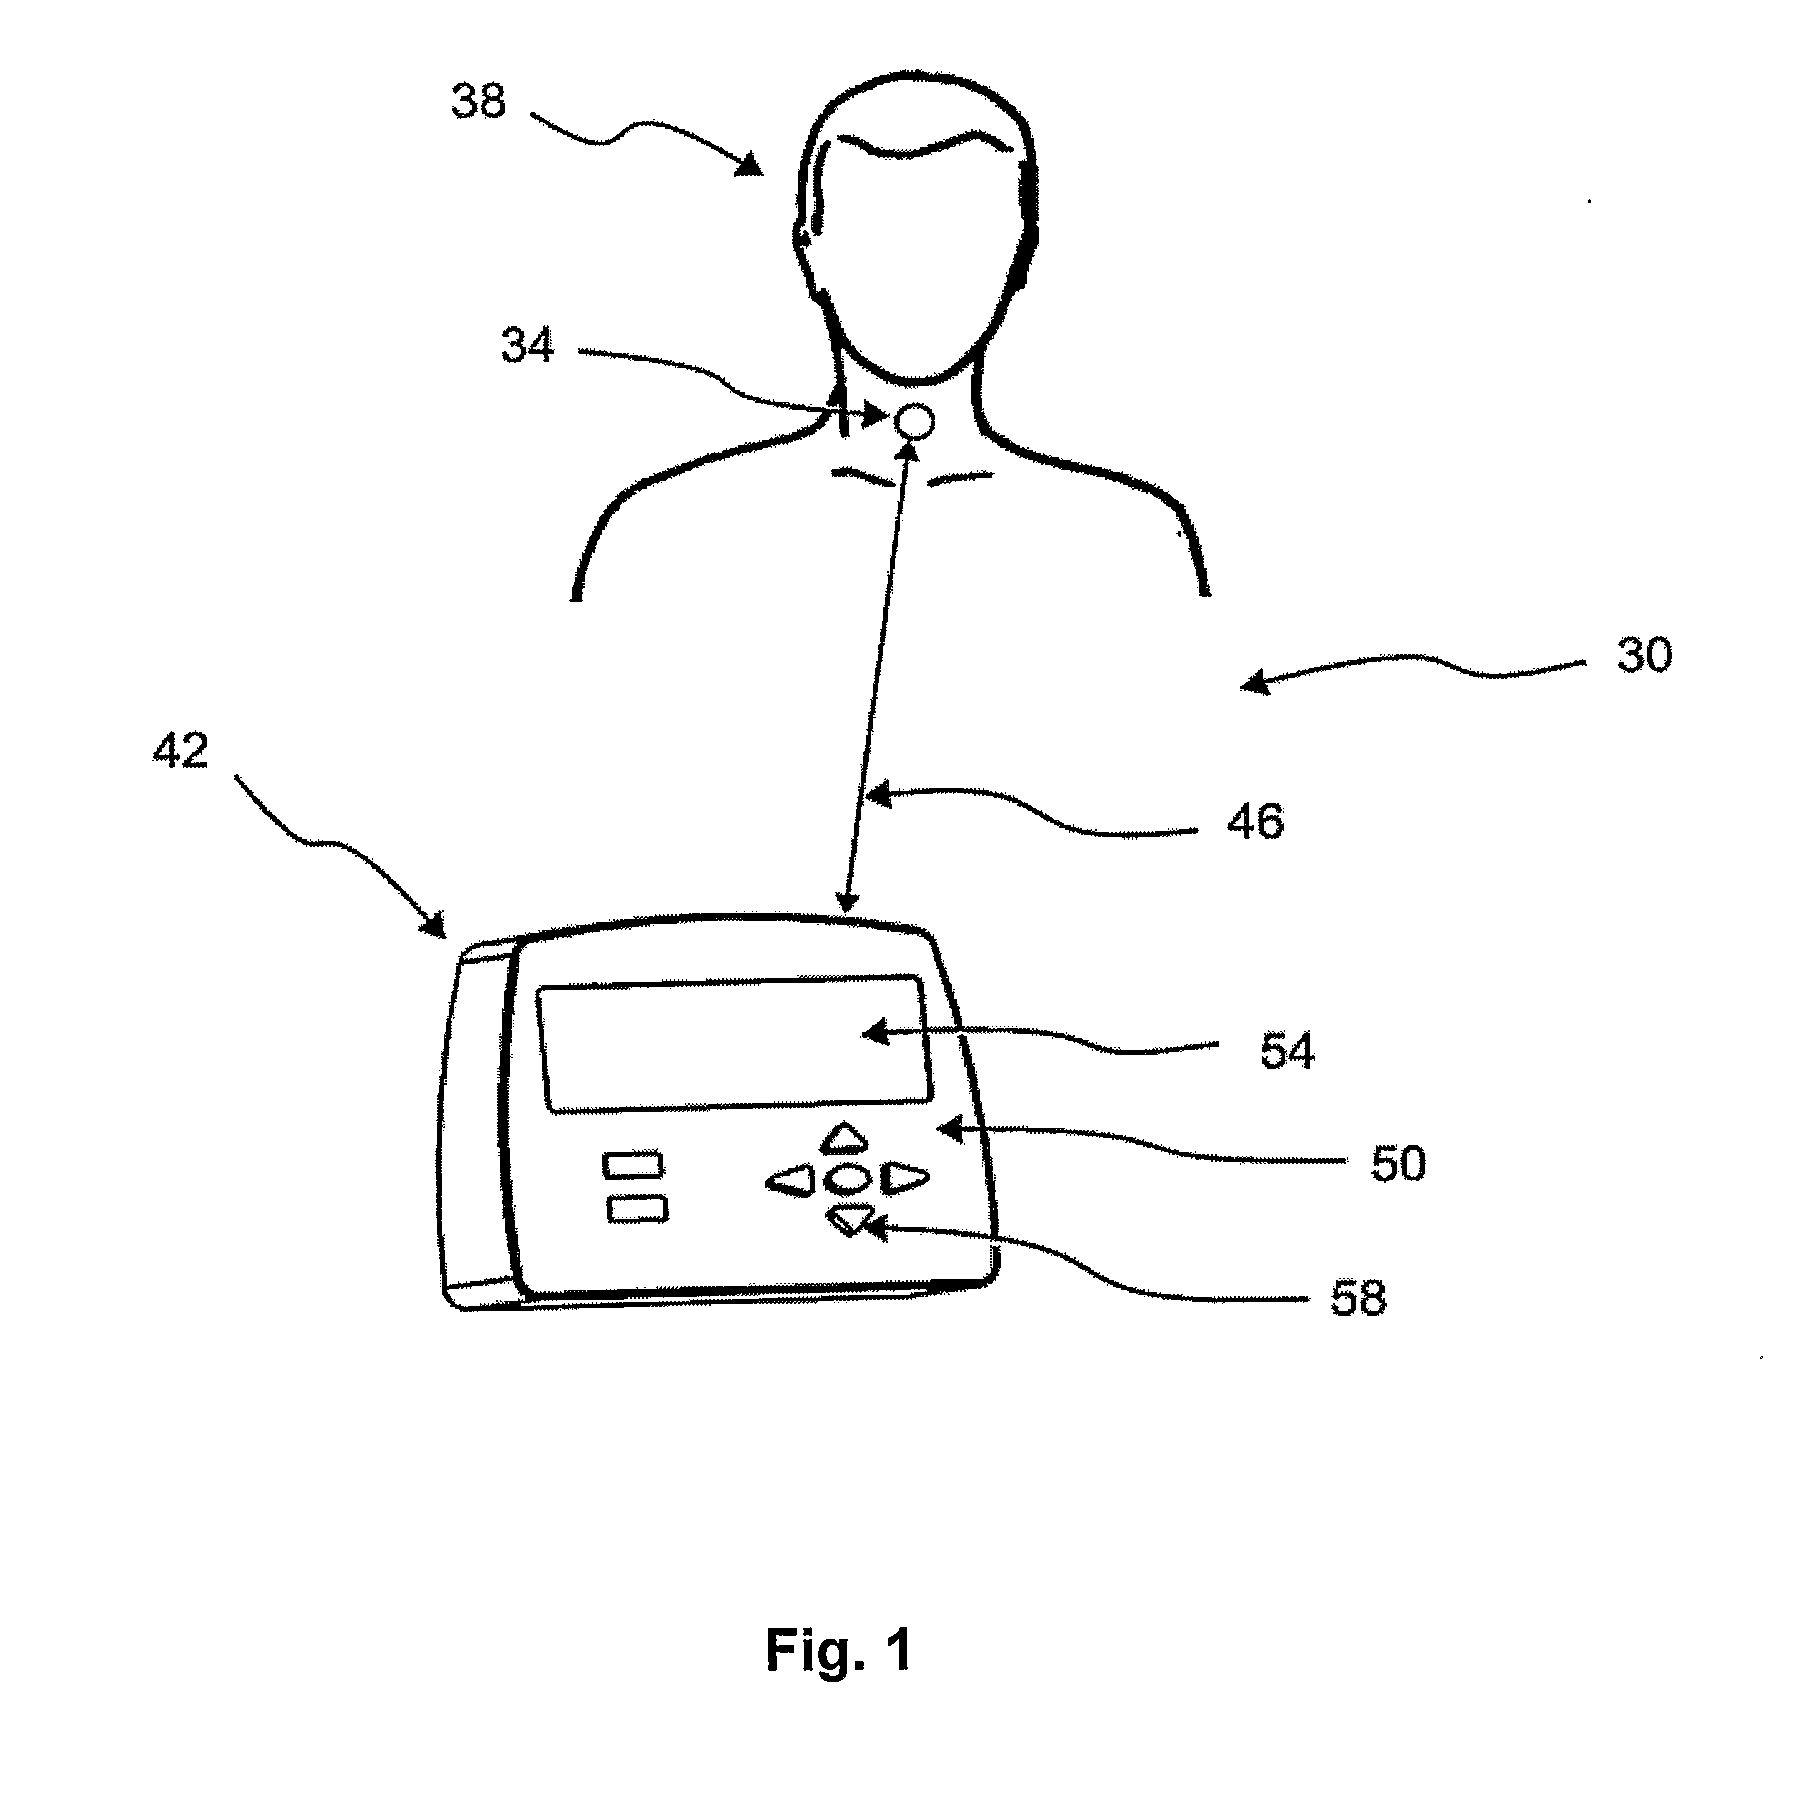 System and Method for Detecting Swallowing Activity